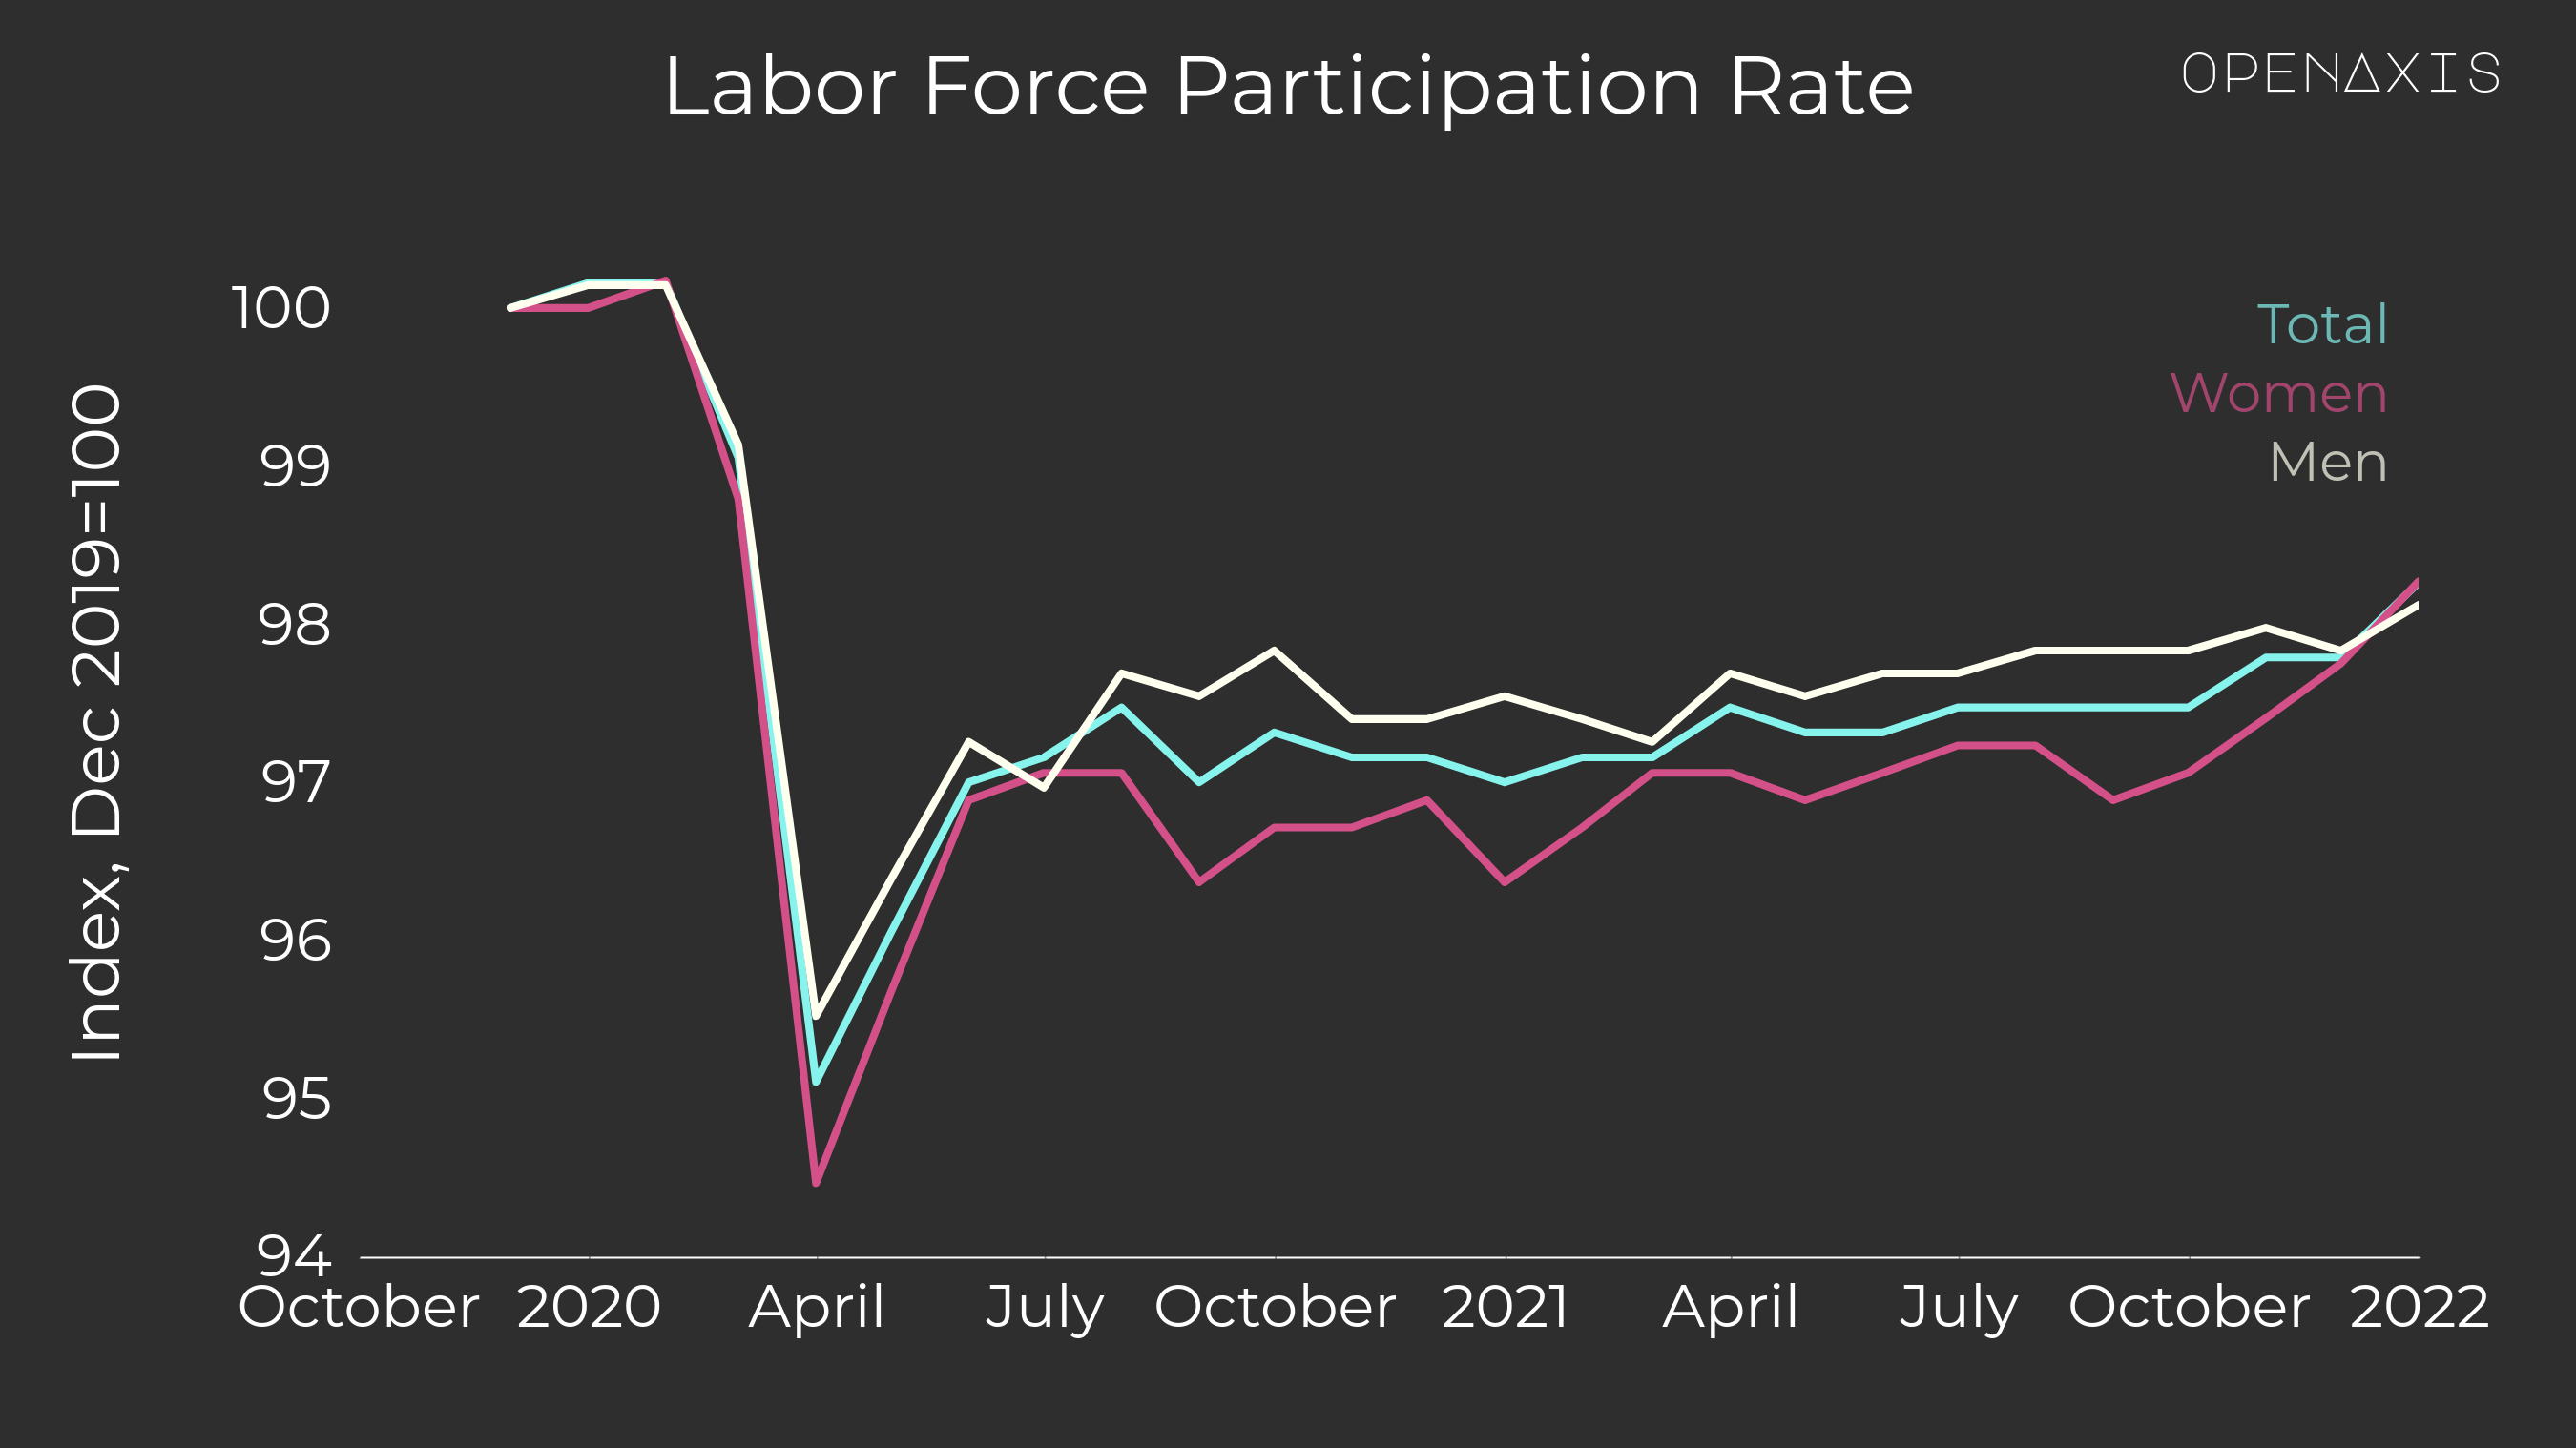 <p>In January 2021, the Labor Force Participation Rate was 1.7% below it's December 2019 level.</p><p>The Labor Force Participation Rate for women was 1.7% below it's December 2019 level, but was still down 1.9% for men.</p><p>﻿<a href="/search?q=%23economy" target="_self">#economy</a>﻿ ﻿<a href="/search?q=%23fred" target="_self">#fred</a>﻿ ﻿<a href="/search?q=%23sotu" target="_self">#sotu</a>﻿ </p><p><br /></p><p><a href="https://app.openaxis.com/projects/openaxis/State-of-the-Union-2022" target="_blank">Return to State of the Union 2022 project by OpenAxis</a></p>